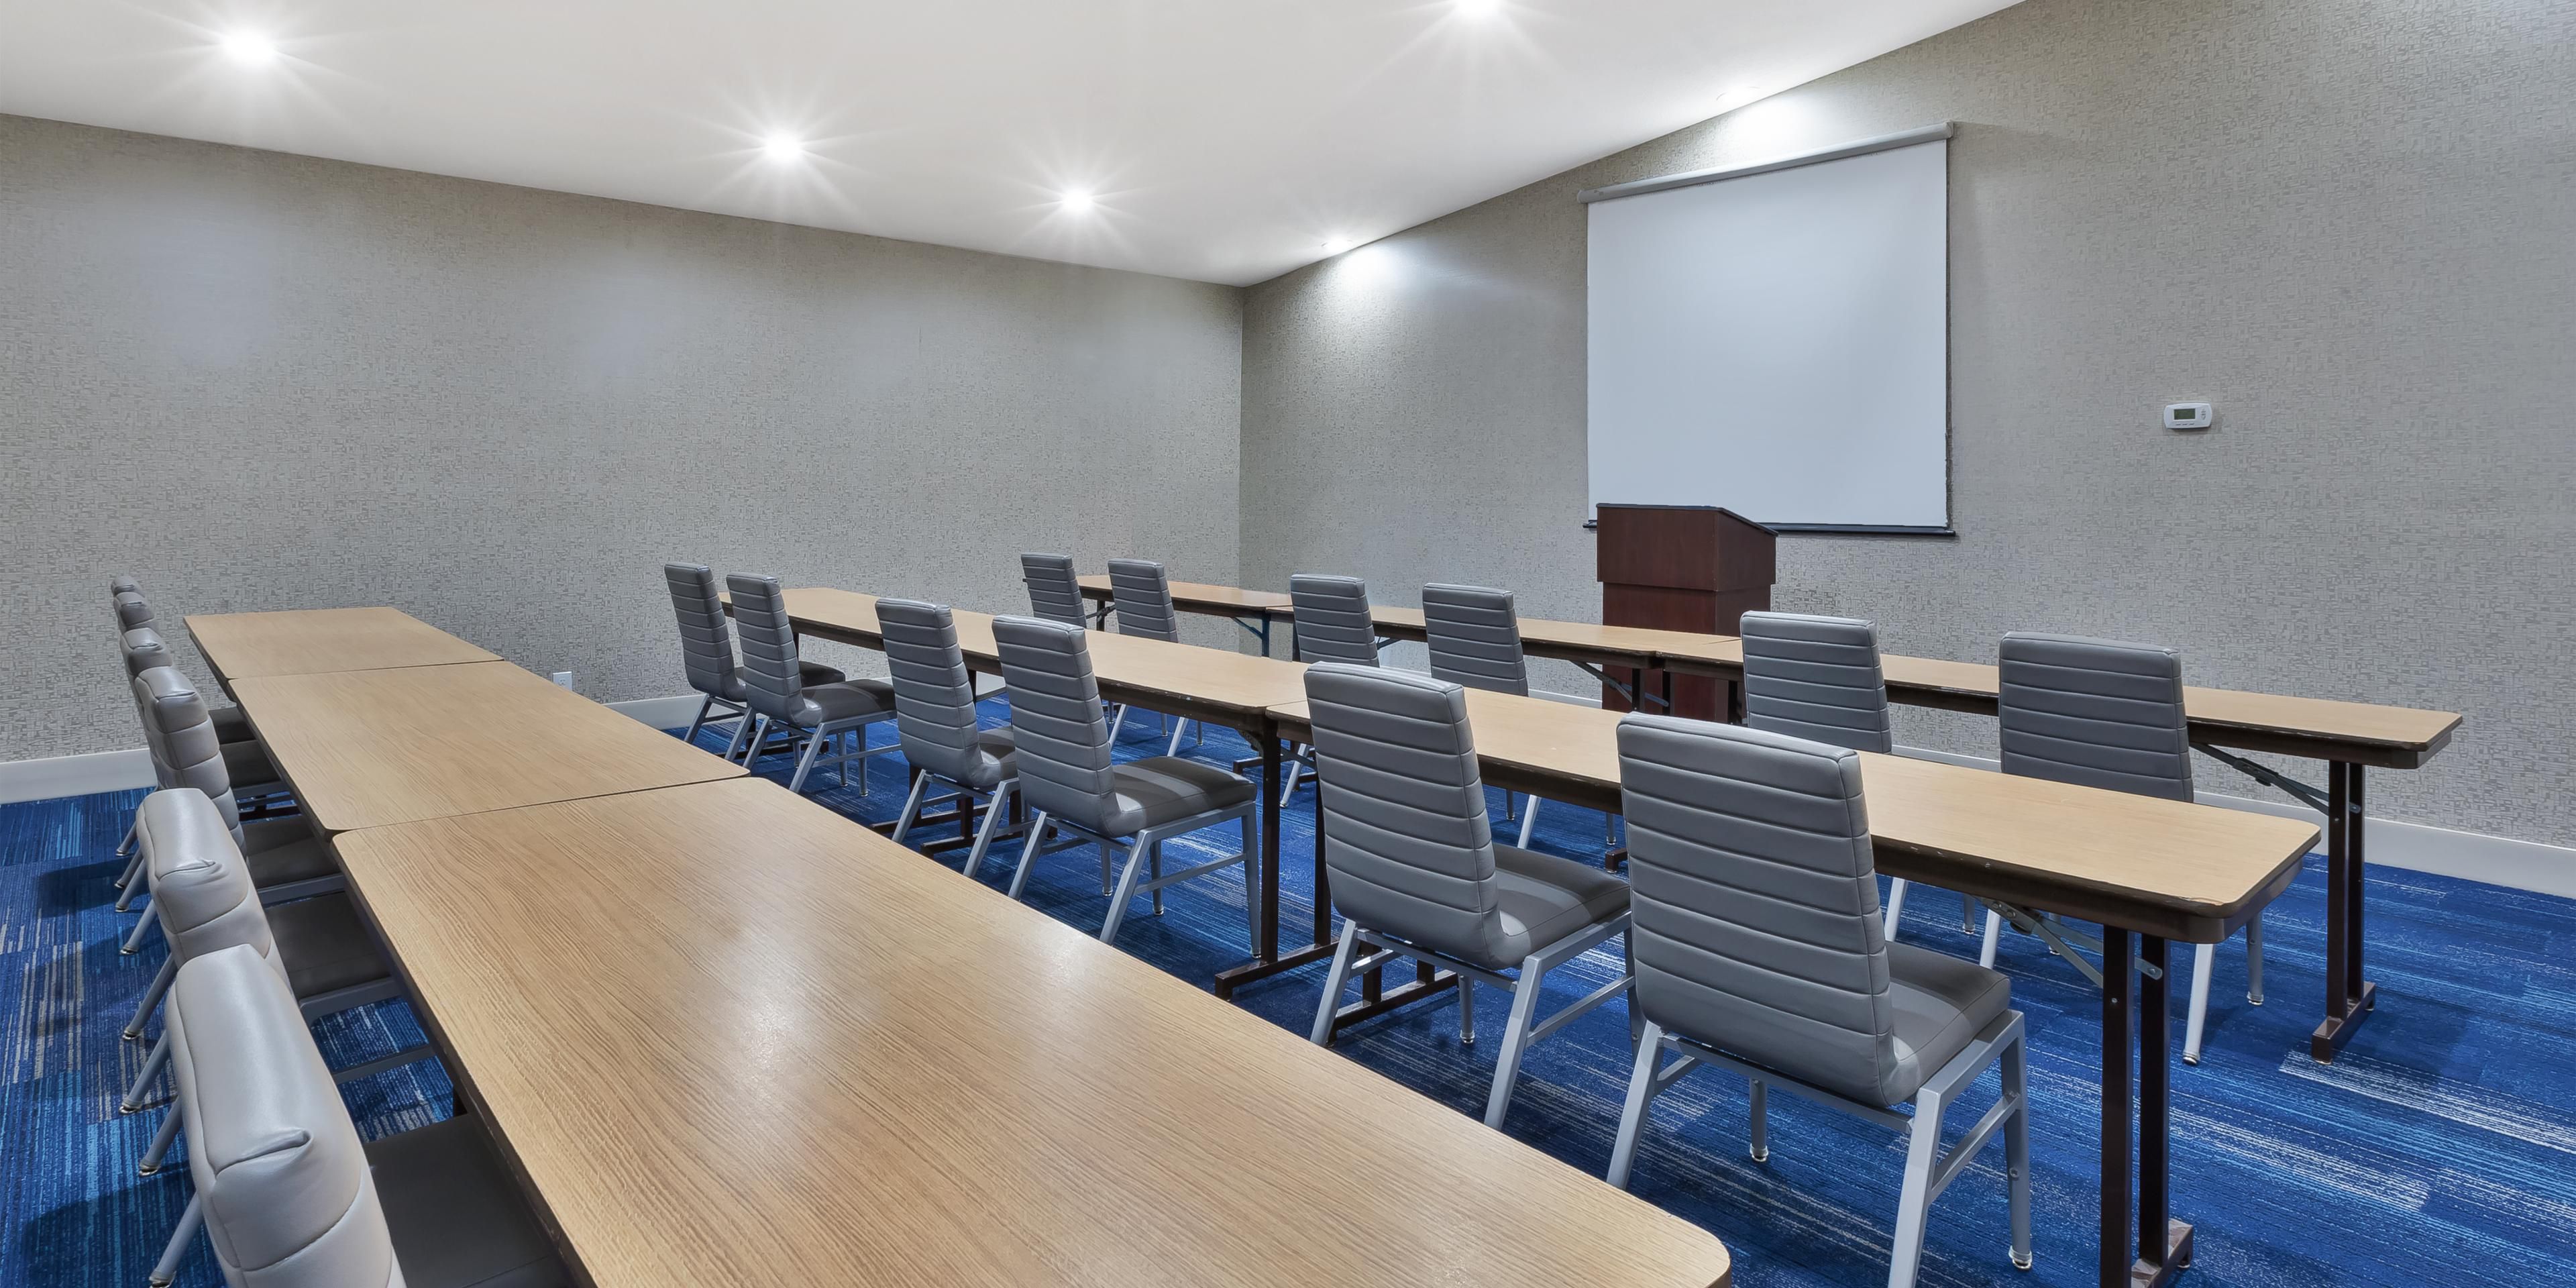 Our attractively decorated meeting rooms can accommodate up to 80 people. The Saint Clair Room and the Huron Room are perfect for board meetings, training or seminars. Our staff will work with you every step of the way to see that your event is a success.